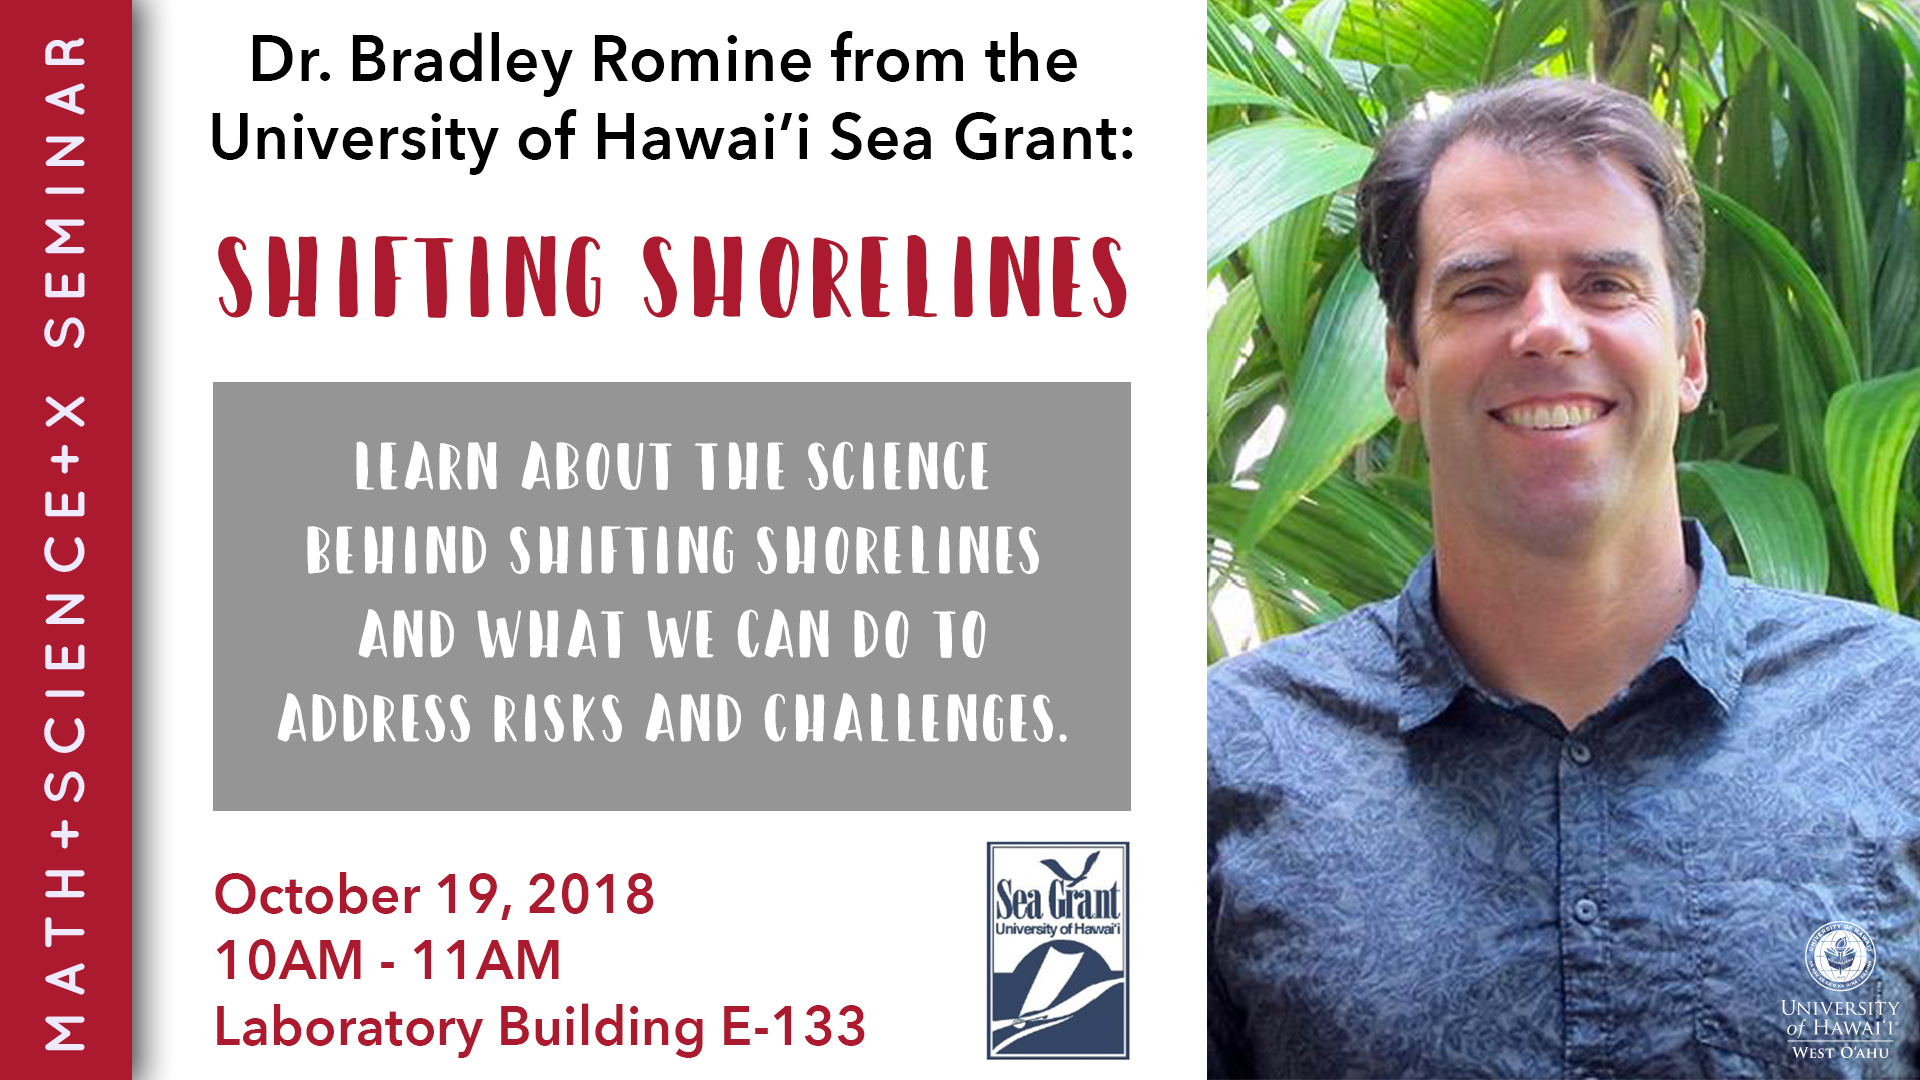 Flier for Math + Science + X seminar with picture of Bradley Romine. Includes information that is presented in the article.